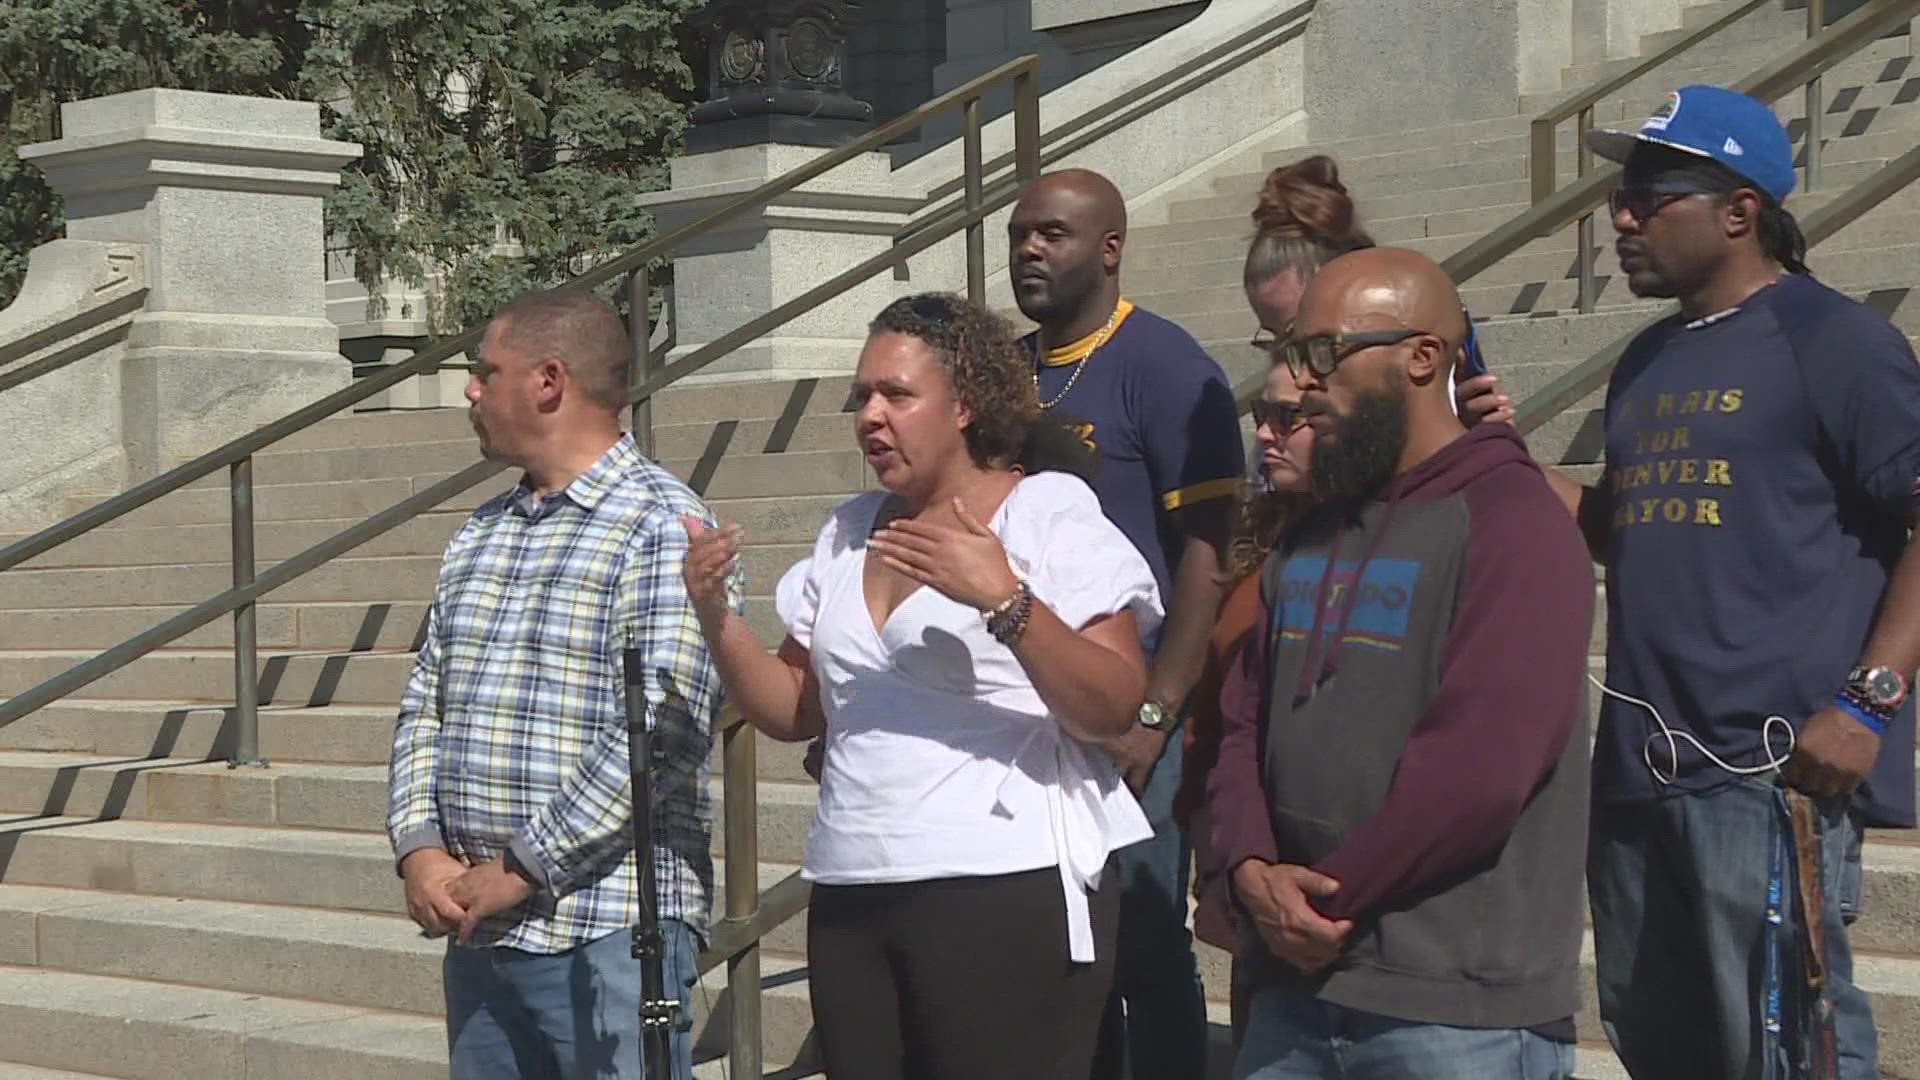 Community leaders in Denver and Aurora say a new statewide task force is in the works. It will focus on police oversight, accountability and community engagement.